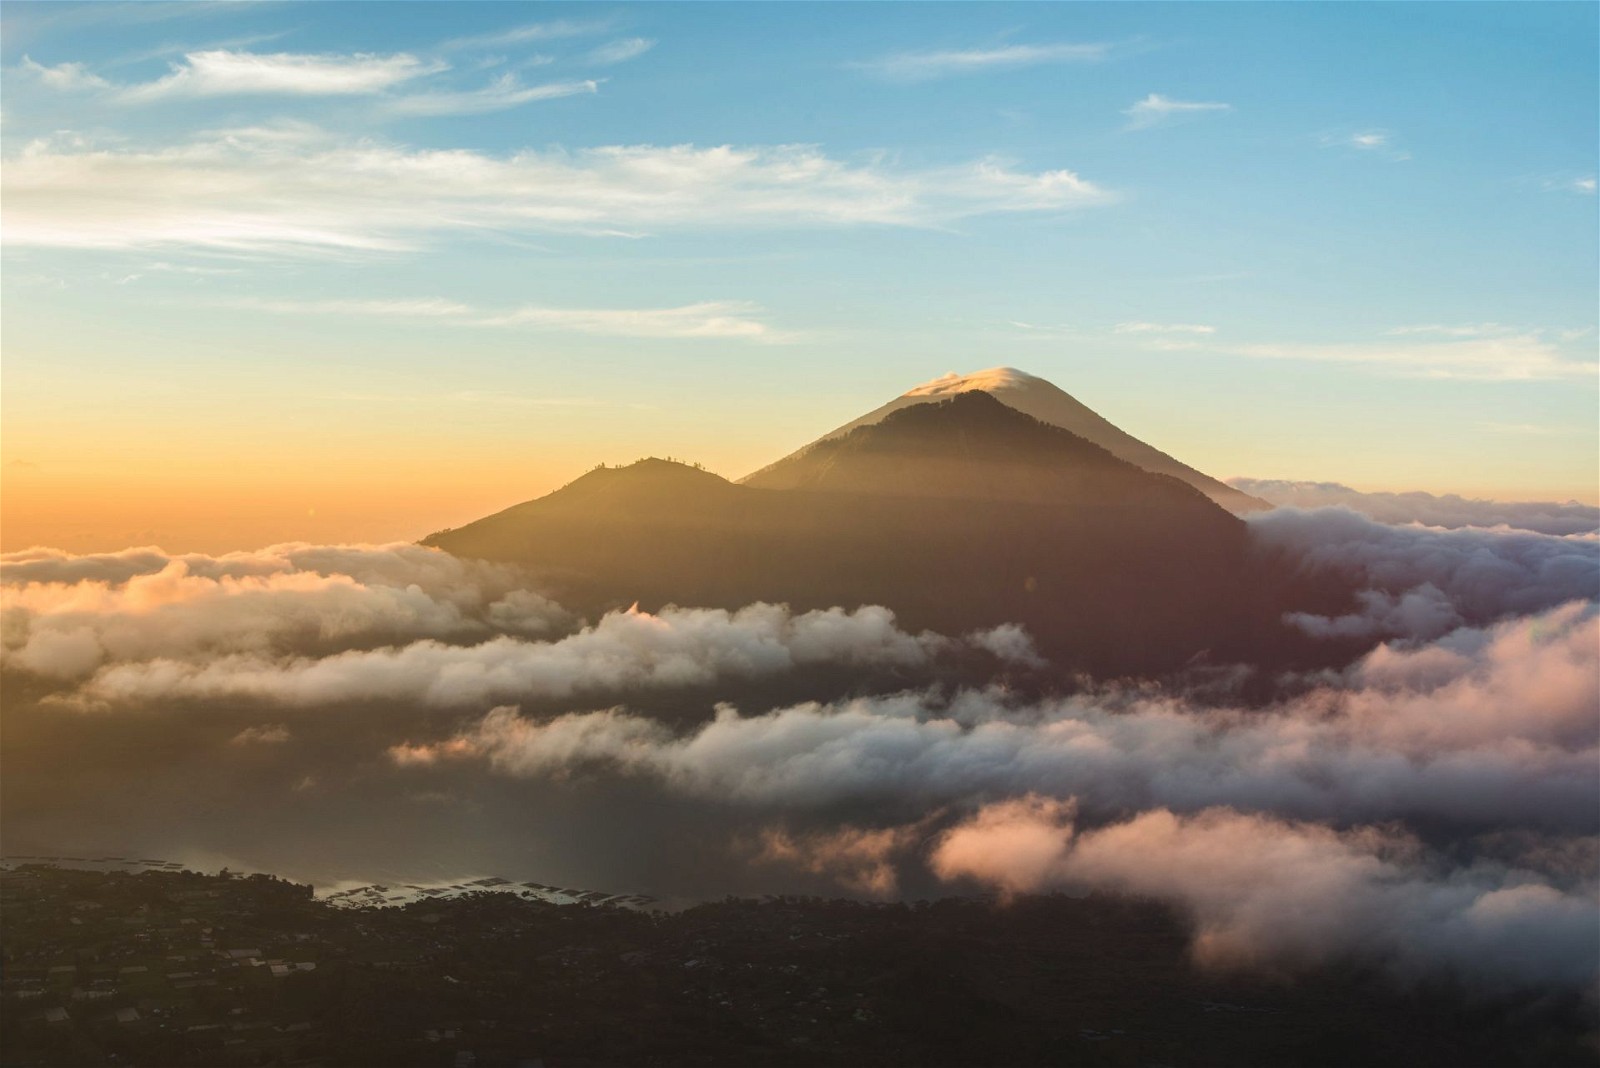 Embark on a sunrise trek to the summit of Mount Batur, an active volcano offering breathtaking panoramic views